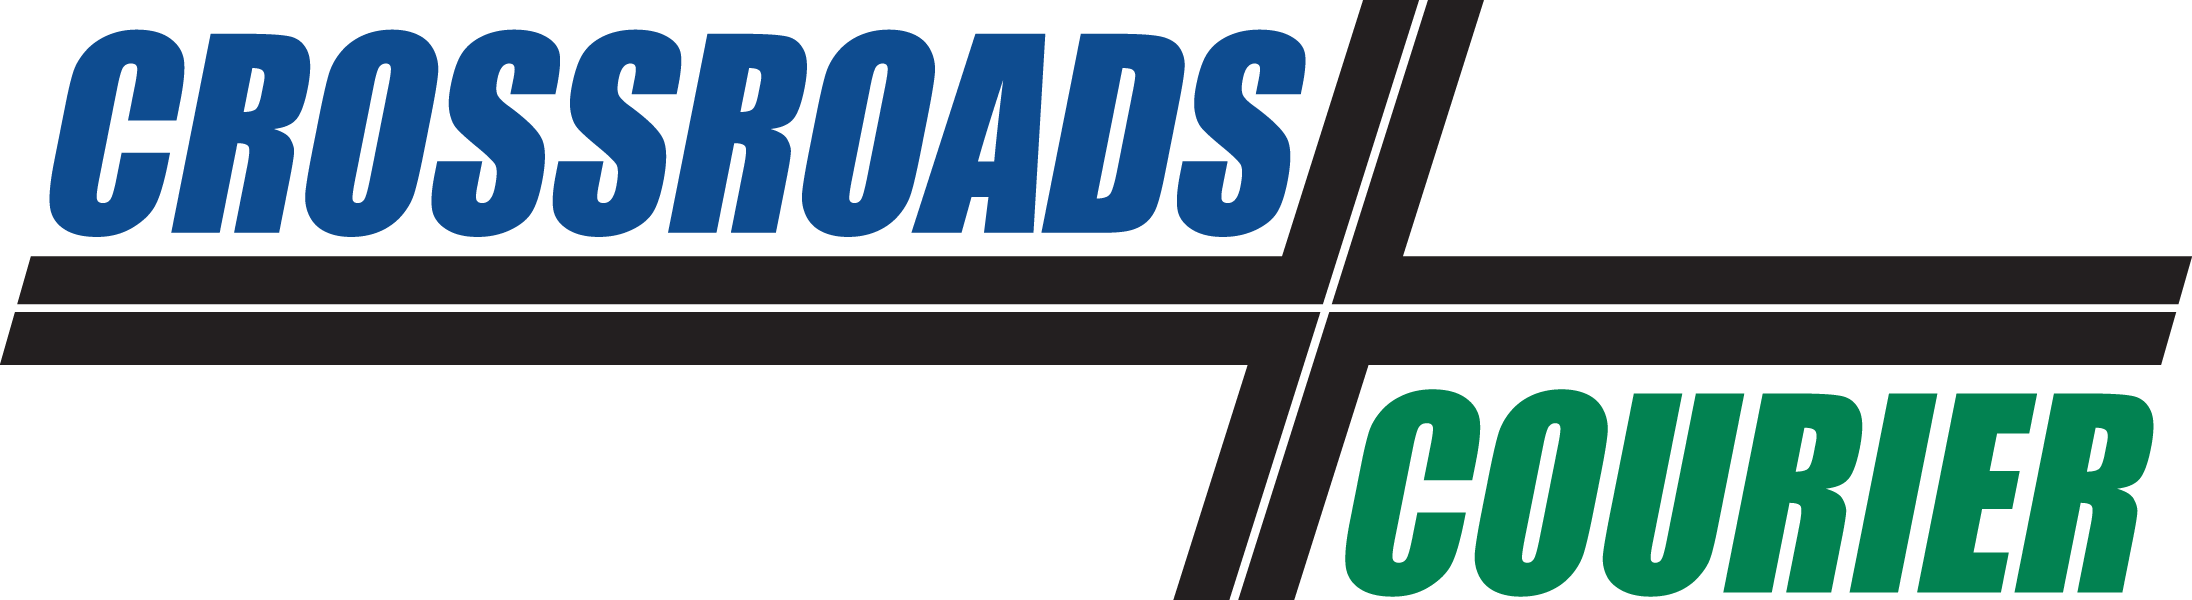 Crossroads_Courier_logo.png